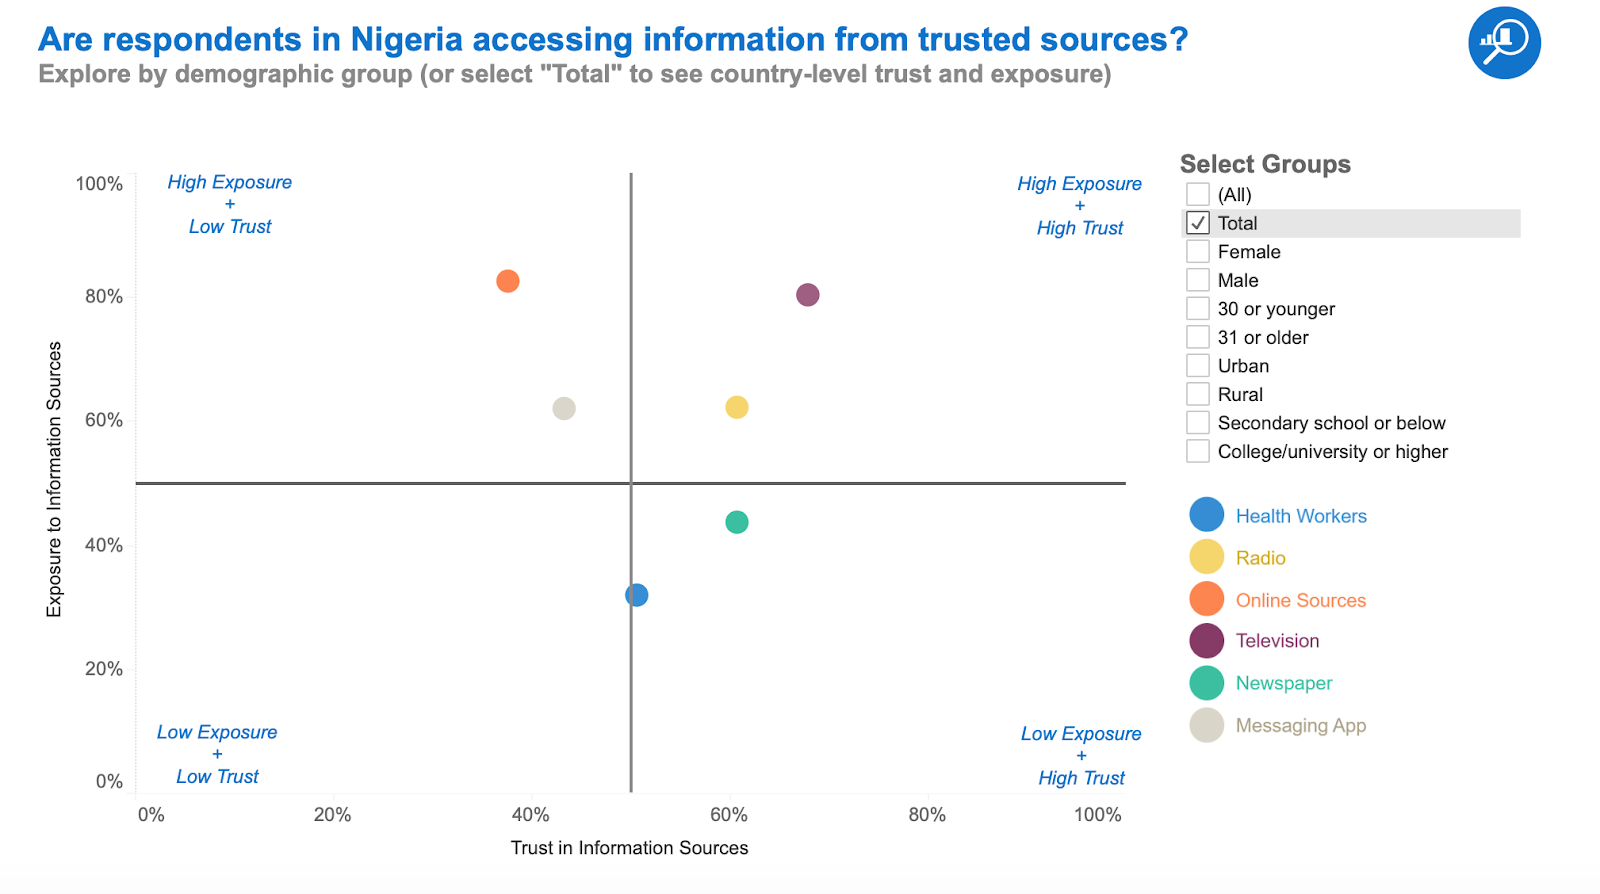 Are respondents in Nigeria accessing information from trusted sources?